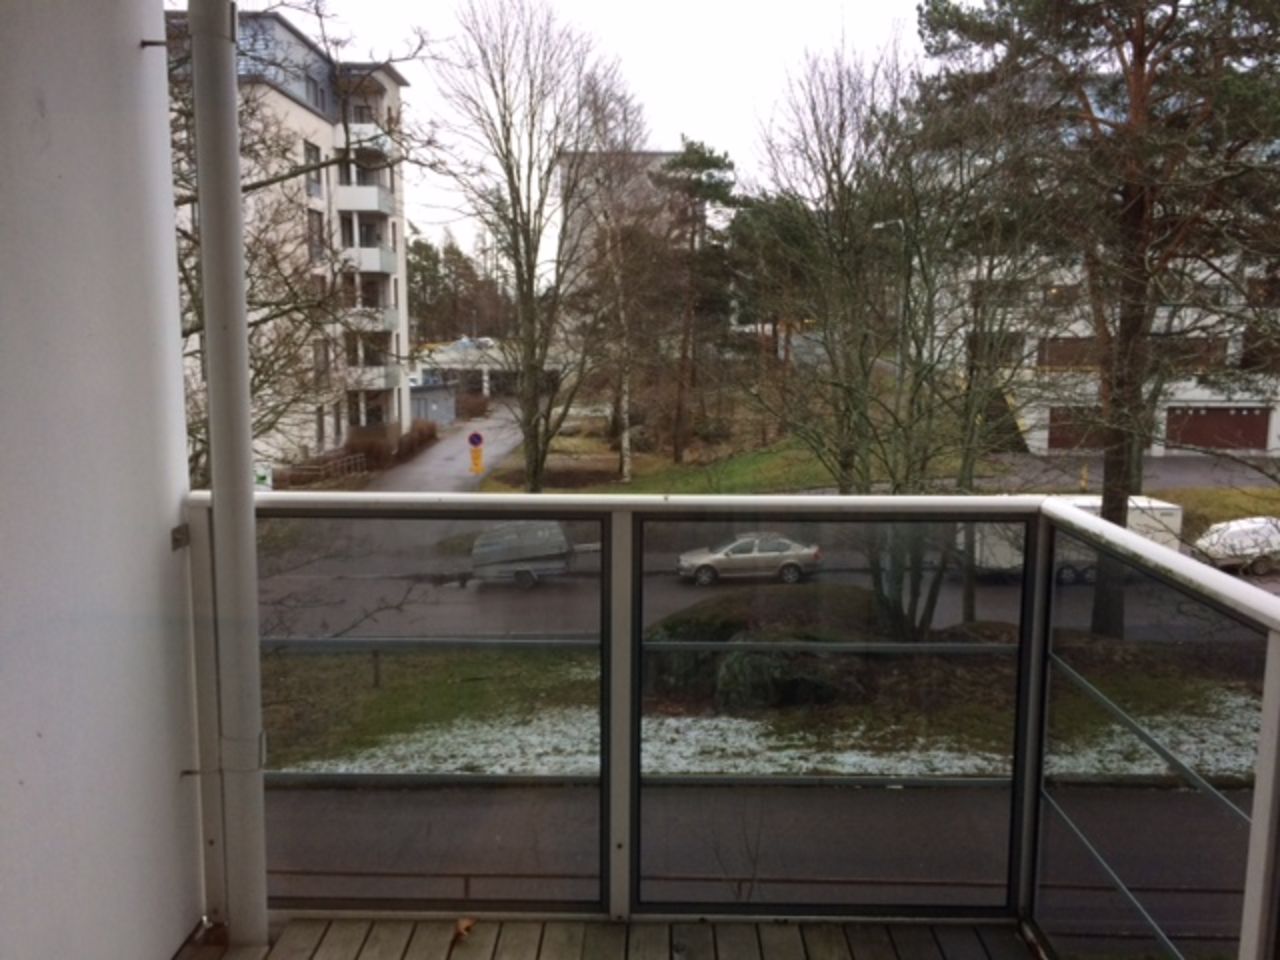 The balcony area of the studio apartments that will house the youngsters of the Oman Muotoinen Koti pilot program. Rent is €250 a month, roughly a third of the price for an average studio apartment in Helsinki.